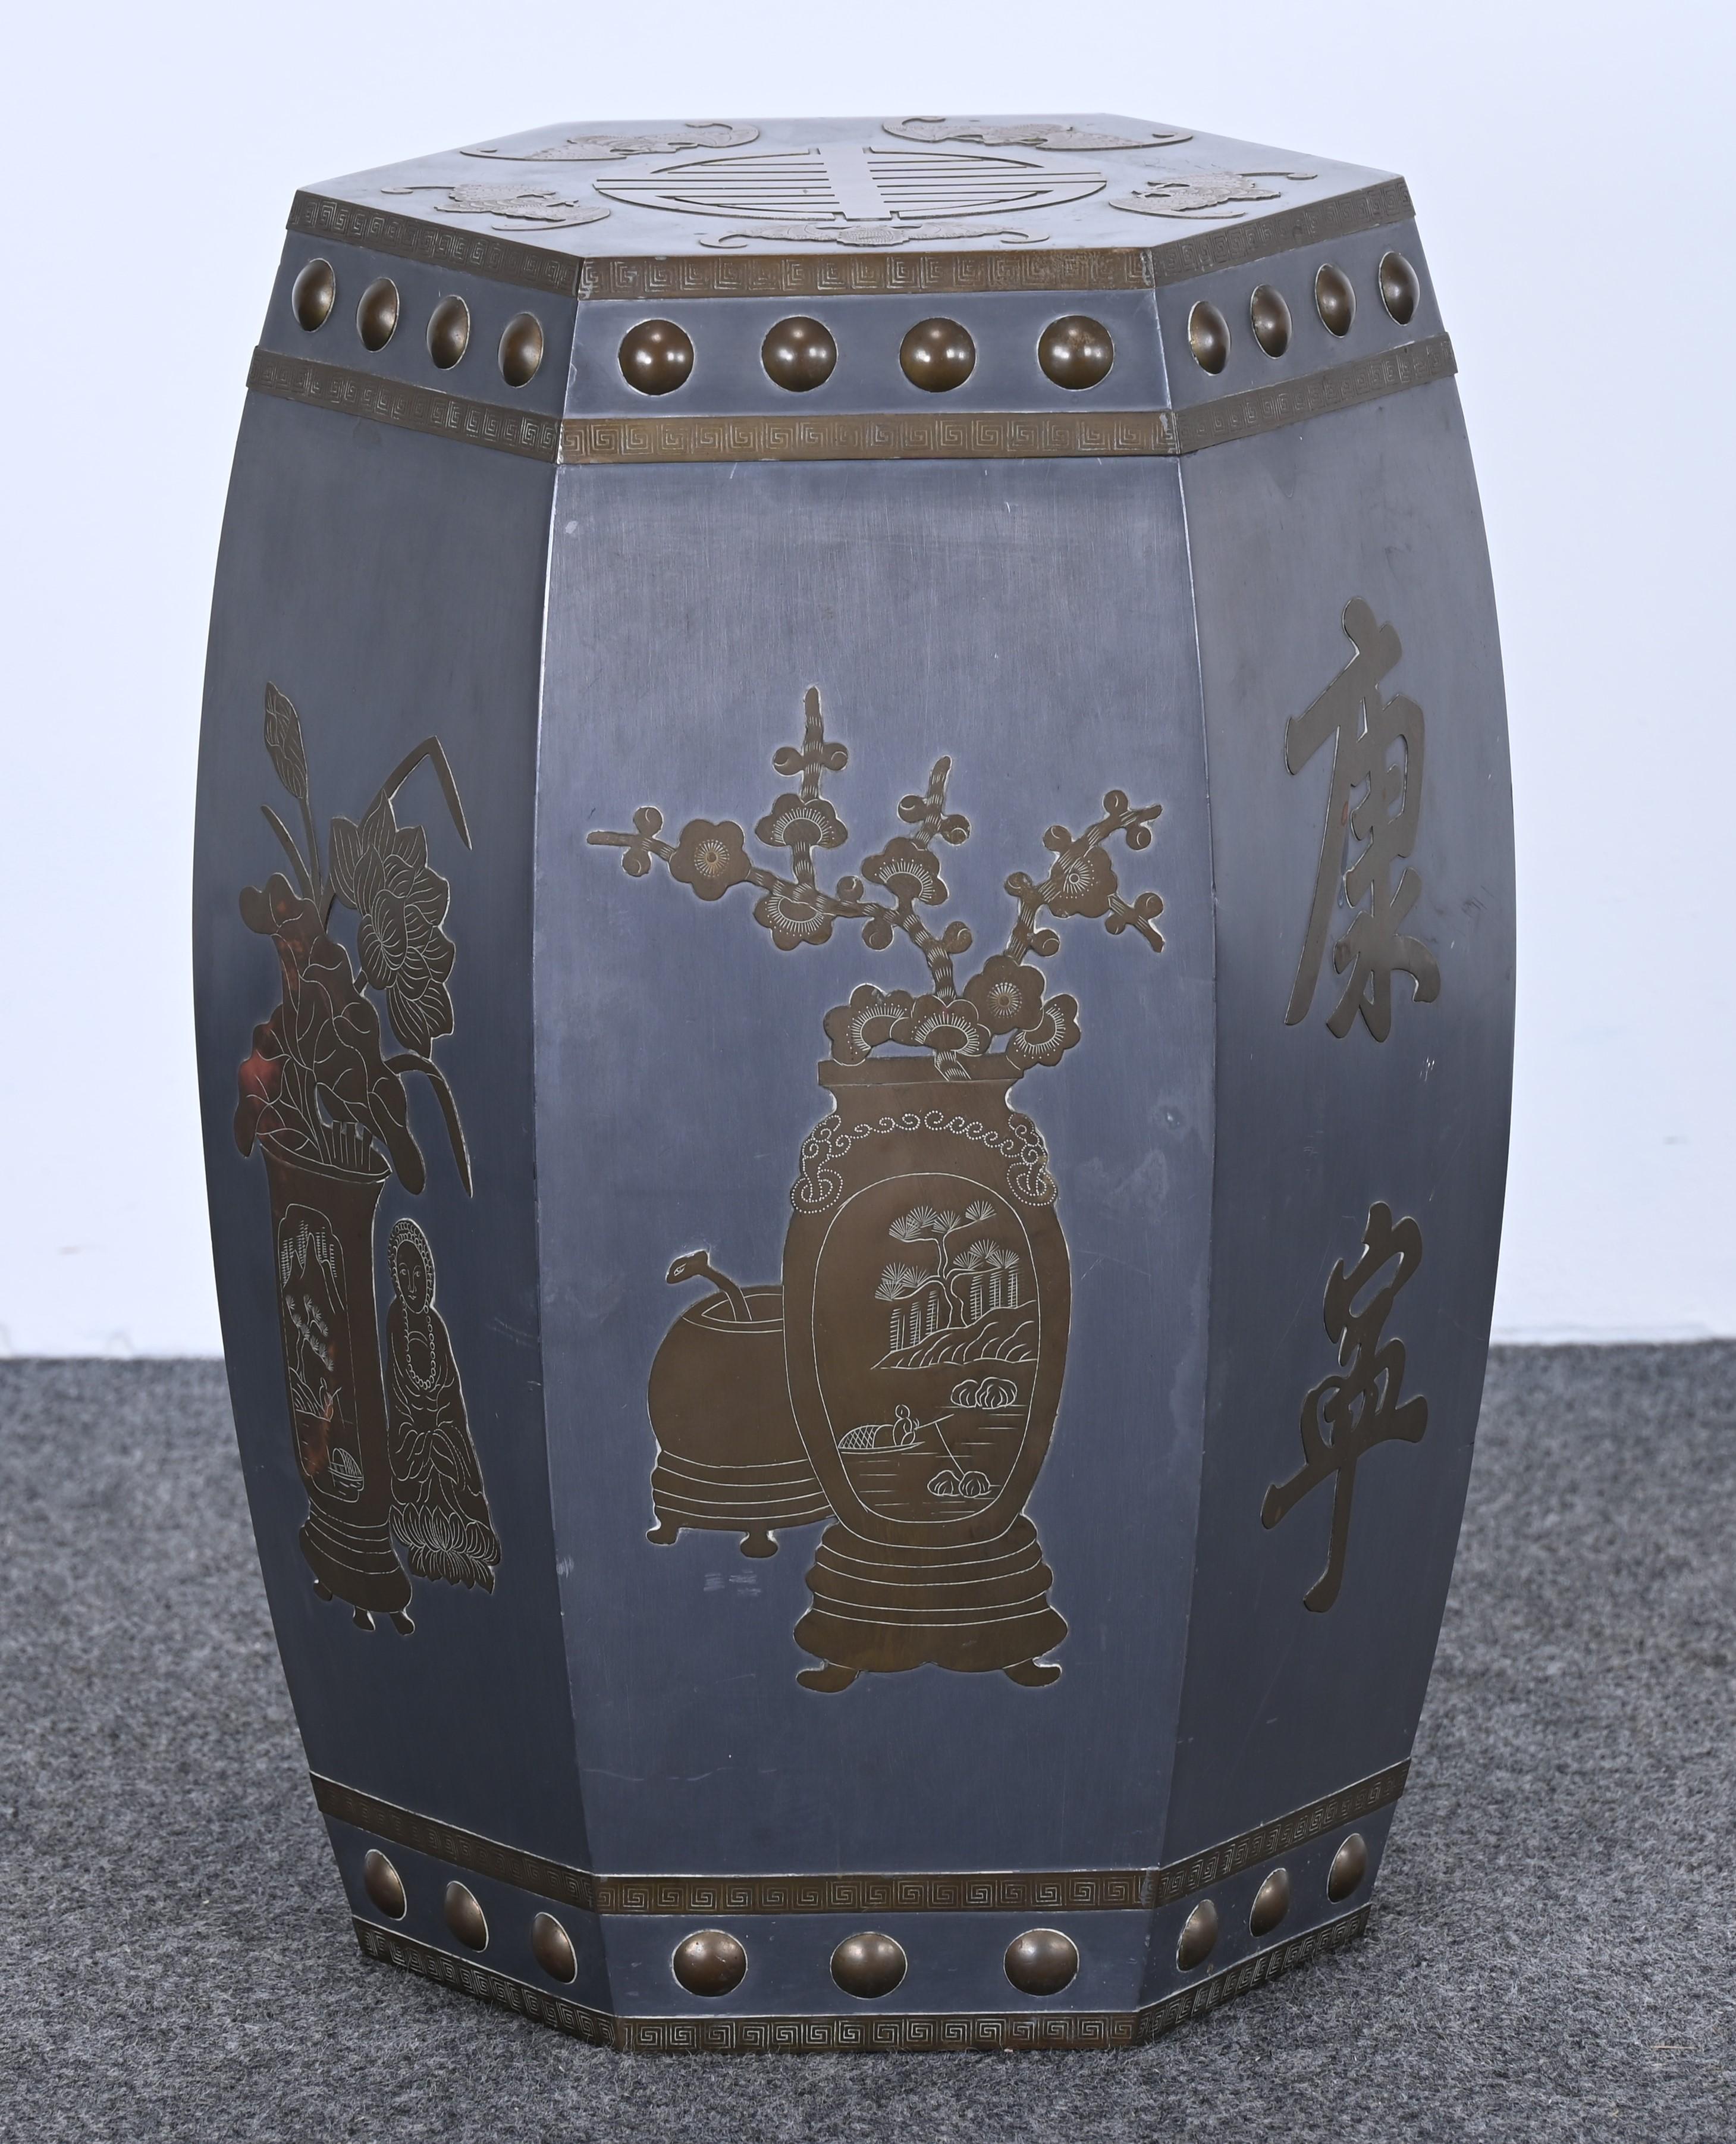 A decorative Chinese pewter and brass garden stool or bench, 1940s to 1950s era. Decorated with beautiful characters such as flowers, vases, bats, and symbols. Marked 